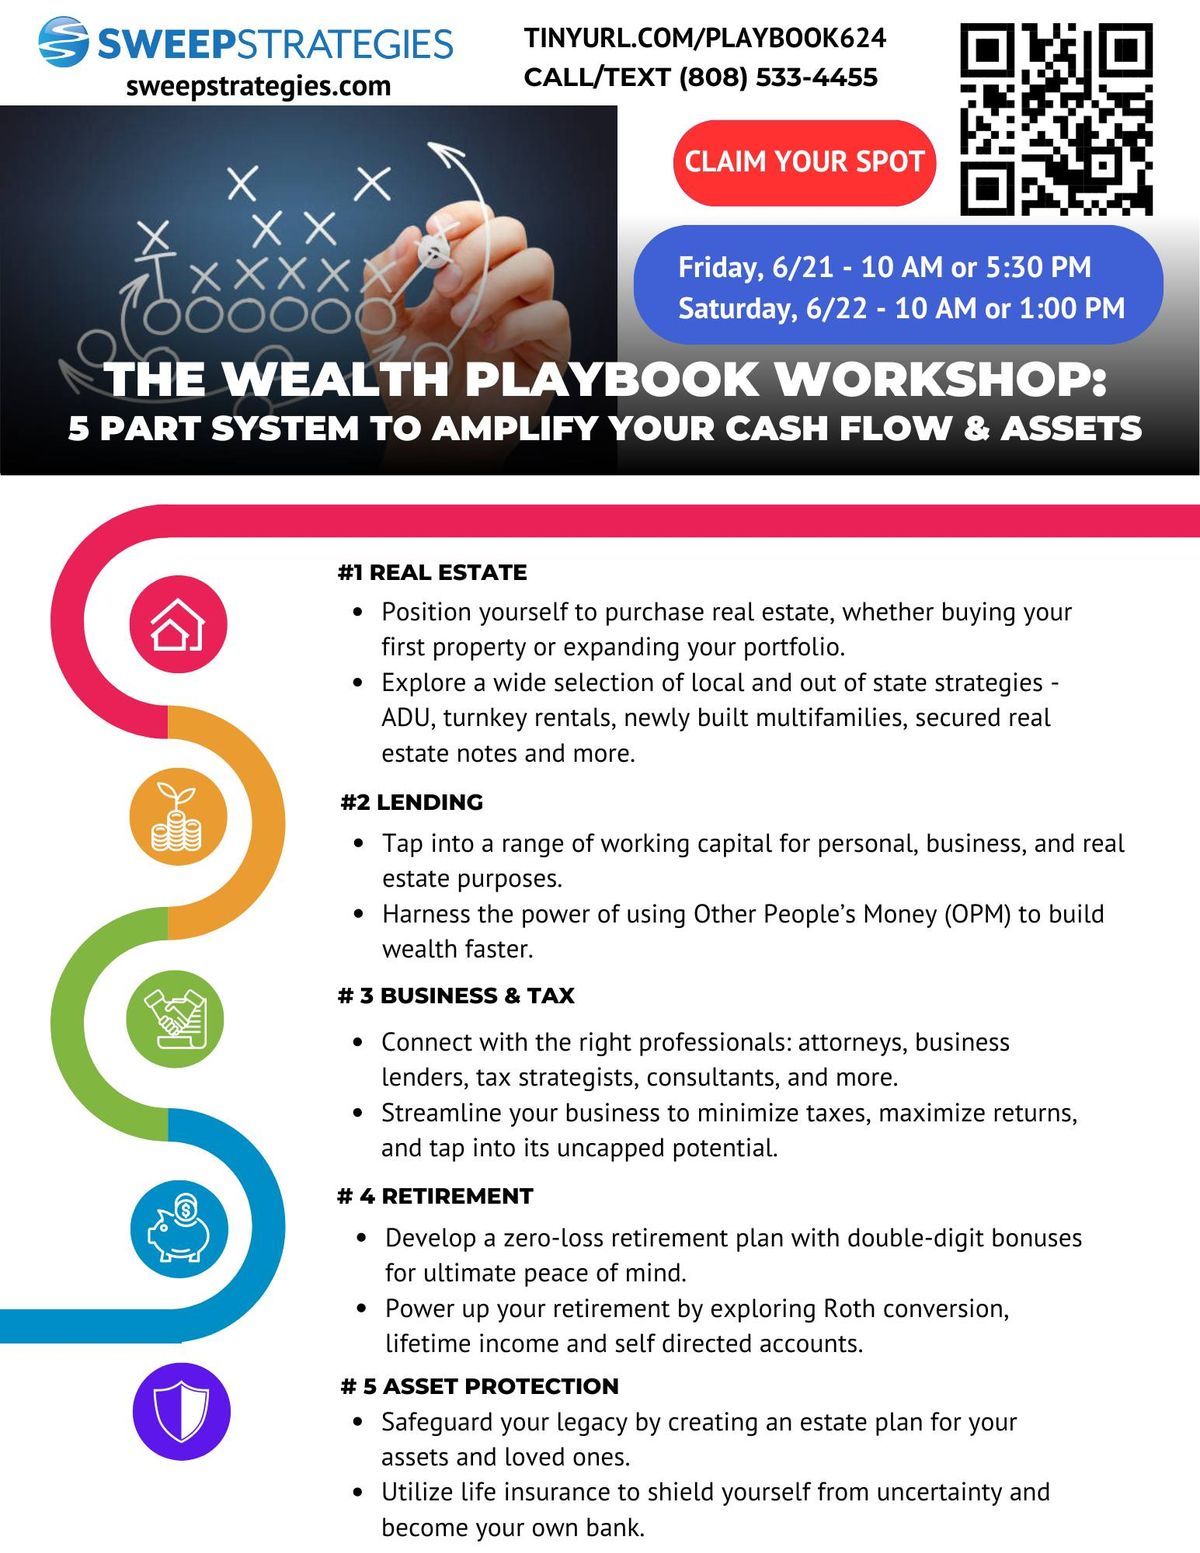 Join the Experts at the In-Person Wealth Playbook Workshop at 1PM